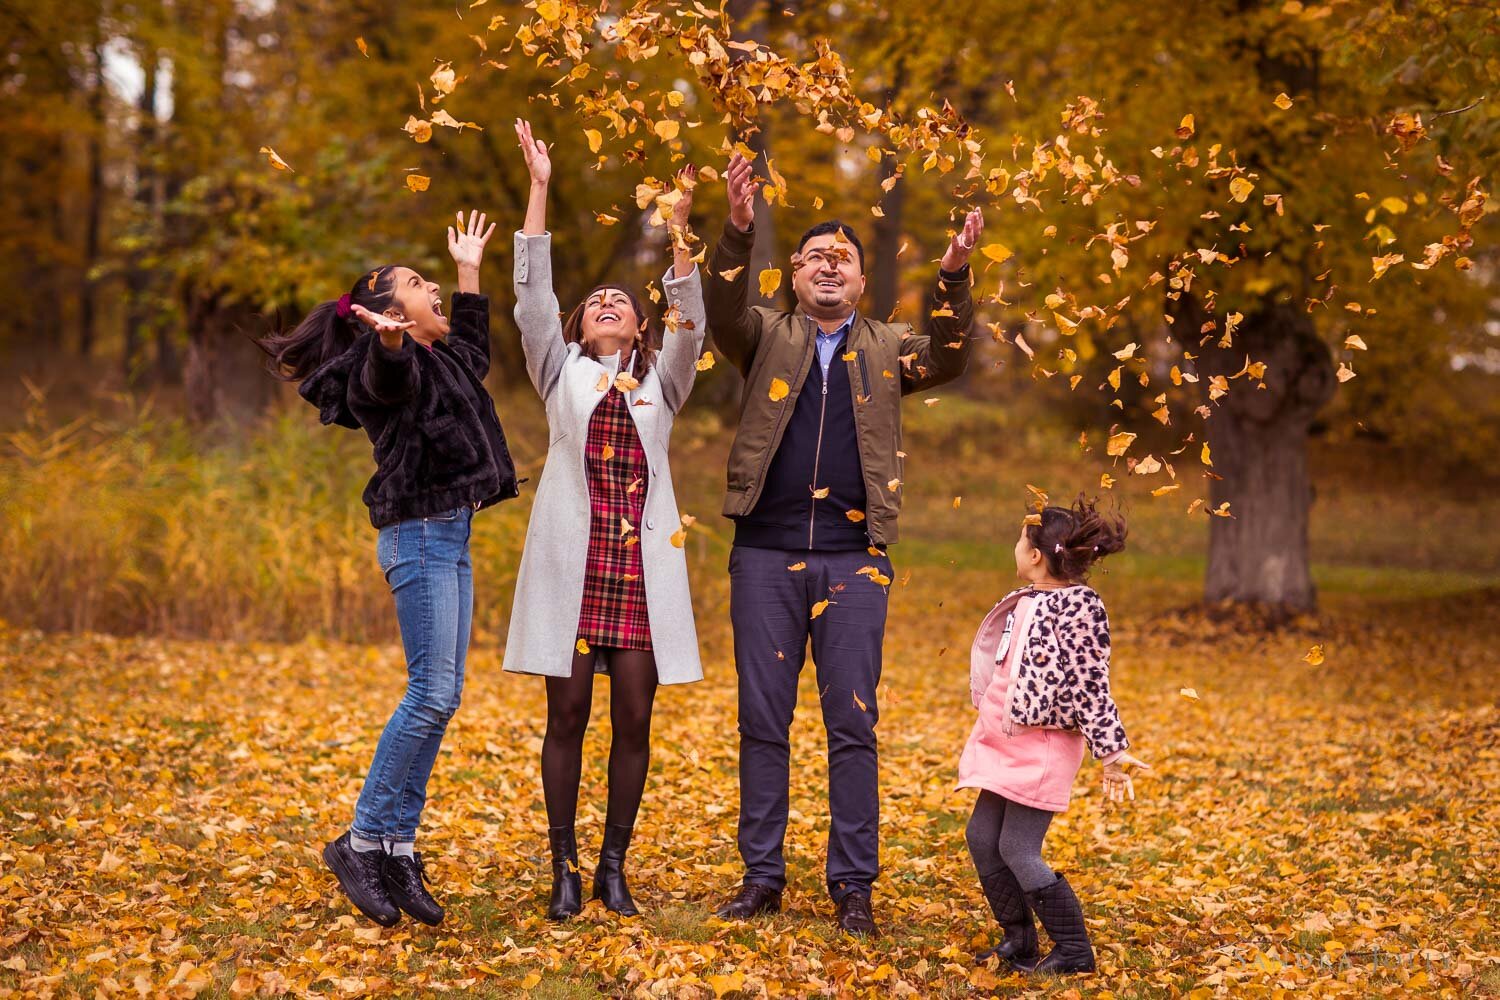 fun-family-autumn-photo-session-at-Ulriksdals-Slott-by-sandra-jolly-stockholm-photographer.jpg